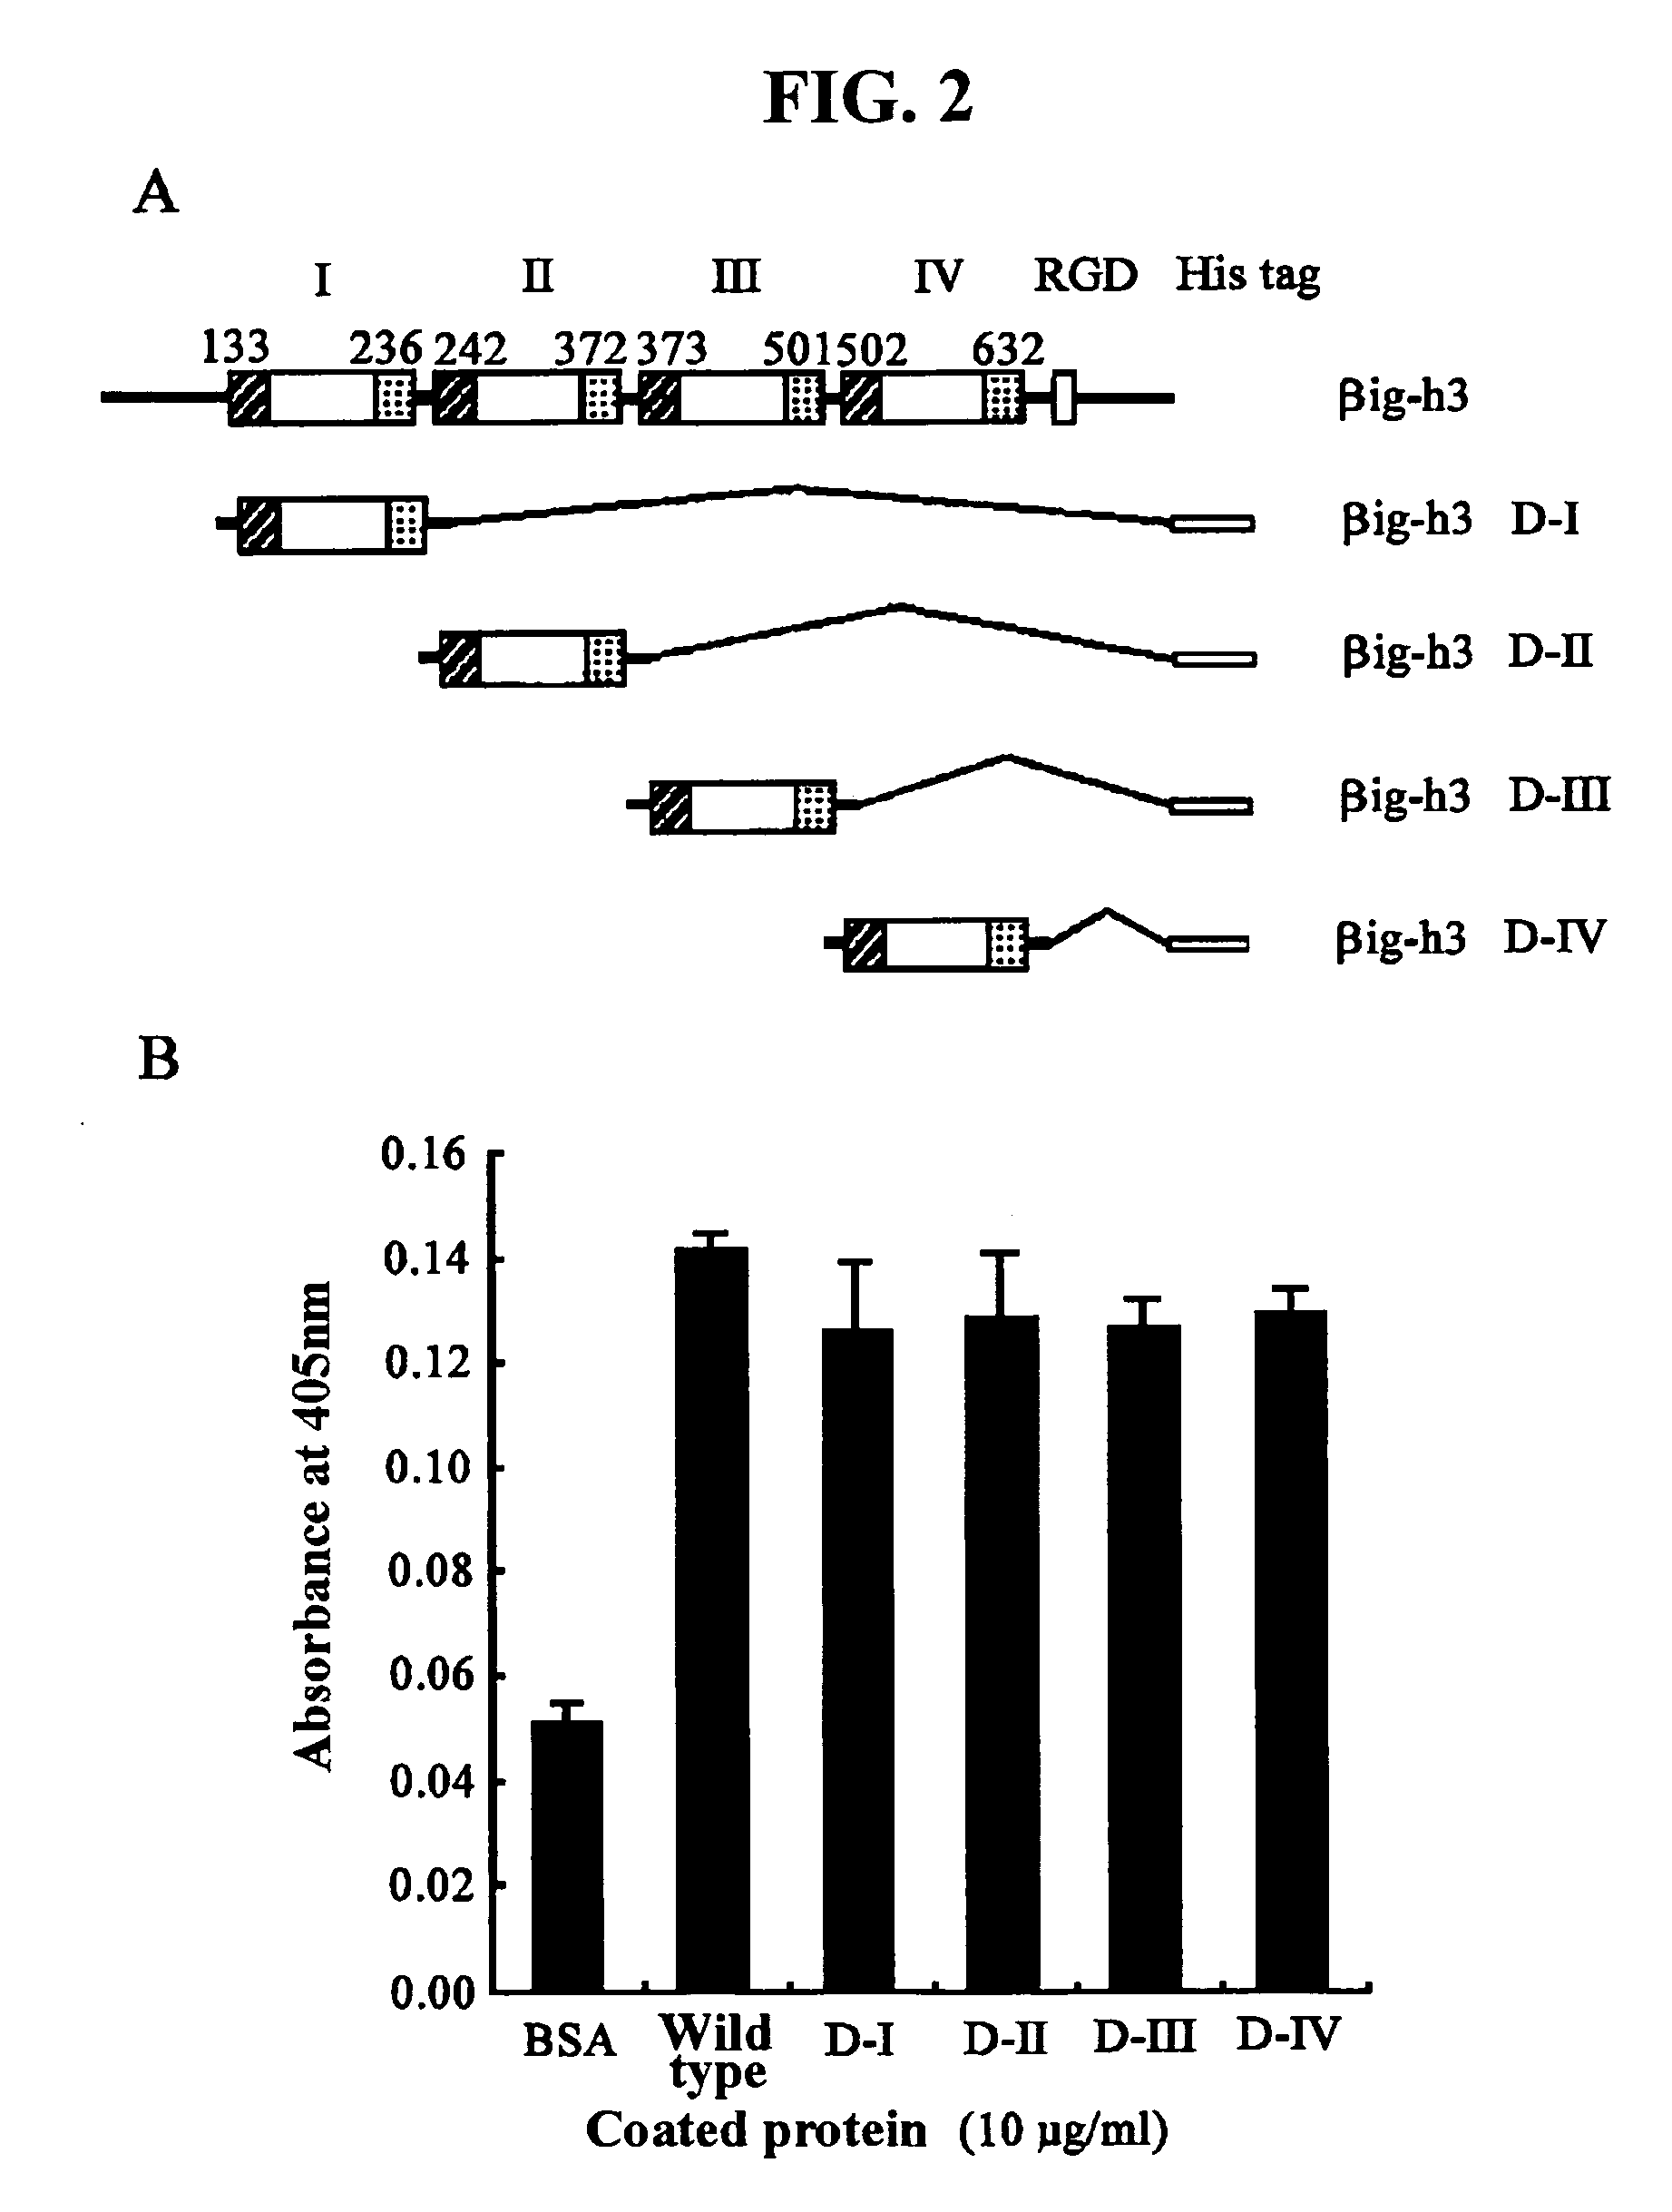 Use of a peptide that interacts with αvβ3 integrin of endothelial cell